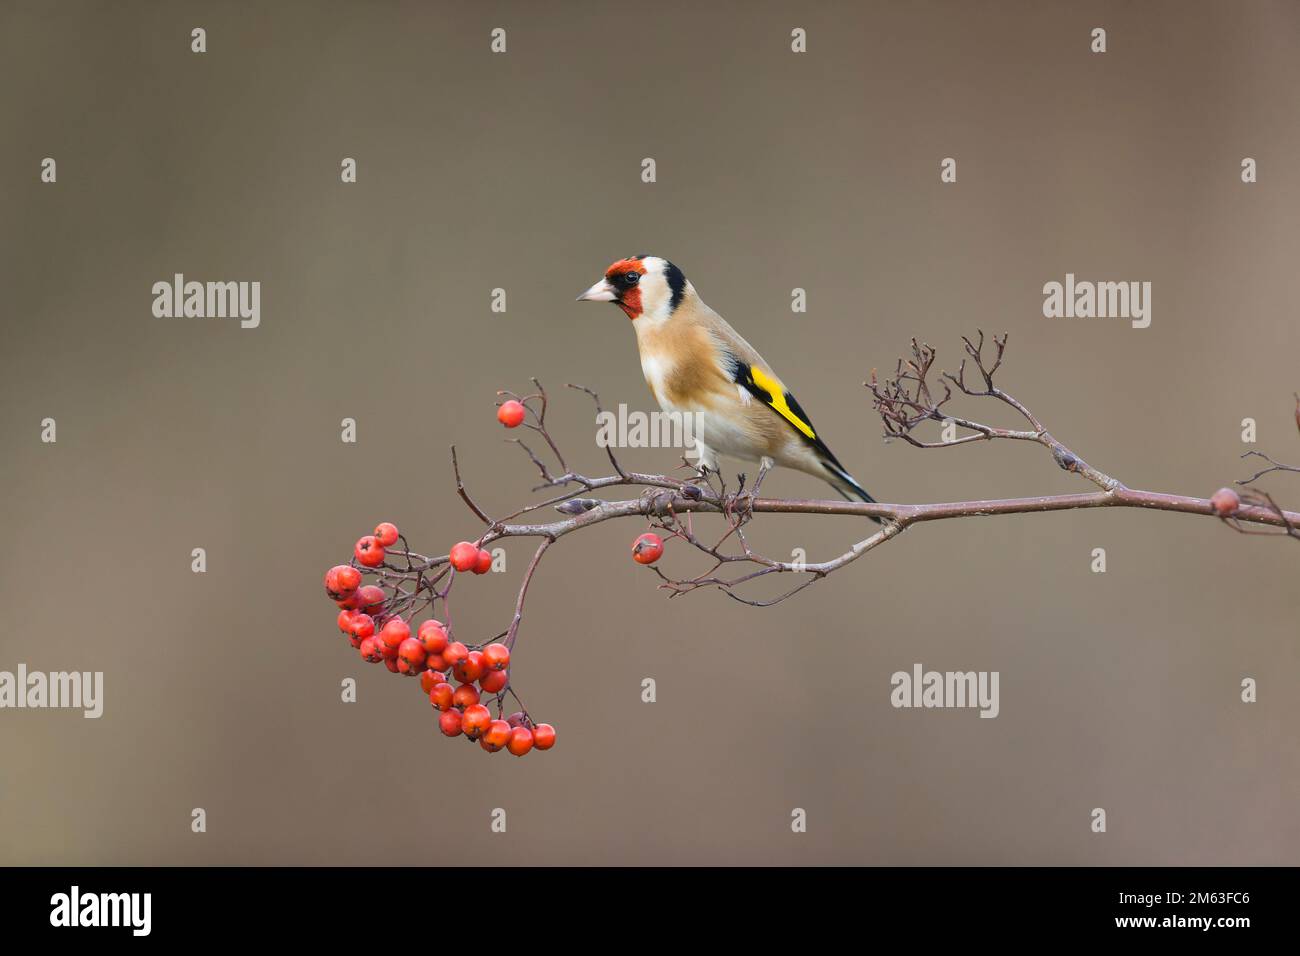 European goldfinch Carduelis carduelis, adult perched on Rowan Sorbus aucuparia, twig with berries, Suffolk, England, January Stock Photo